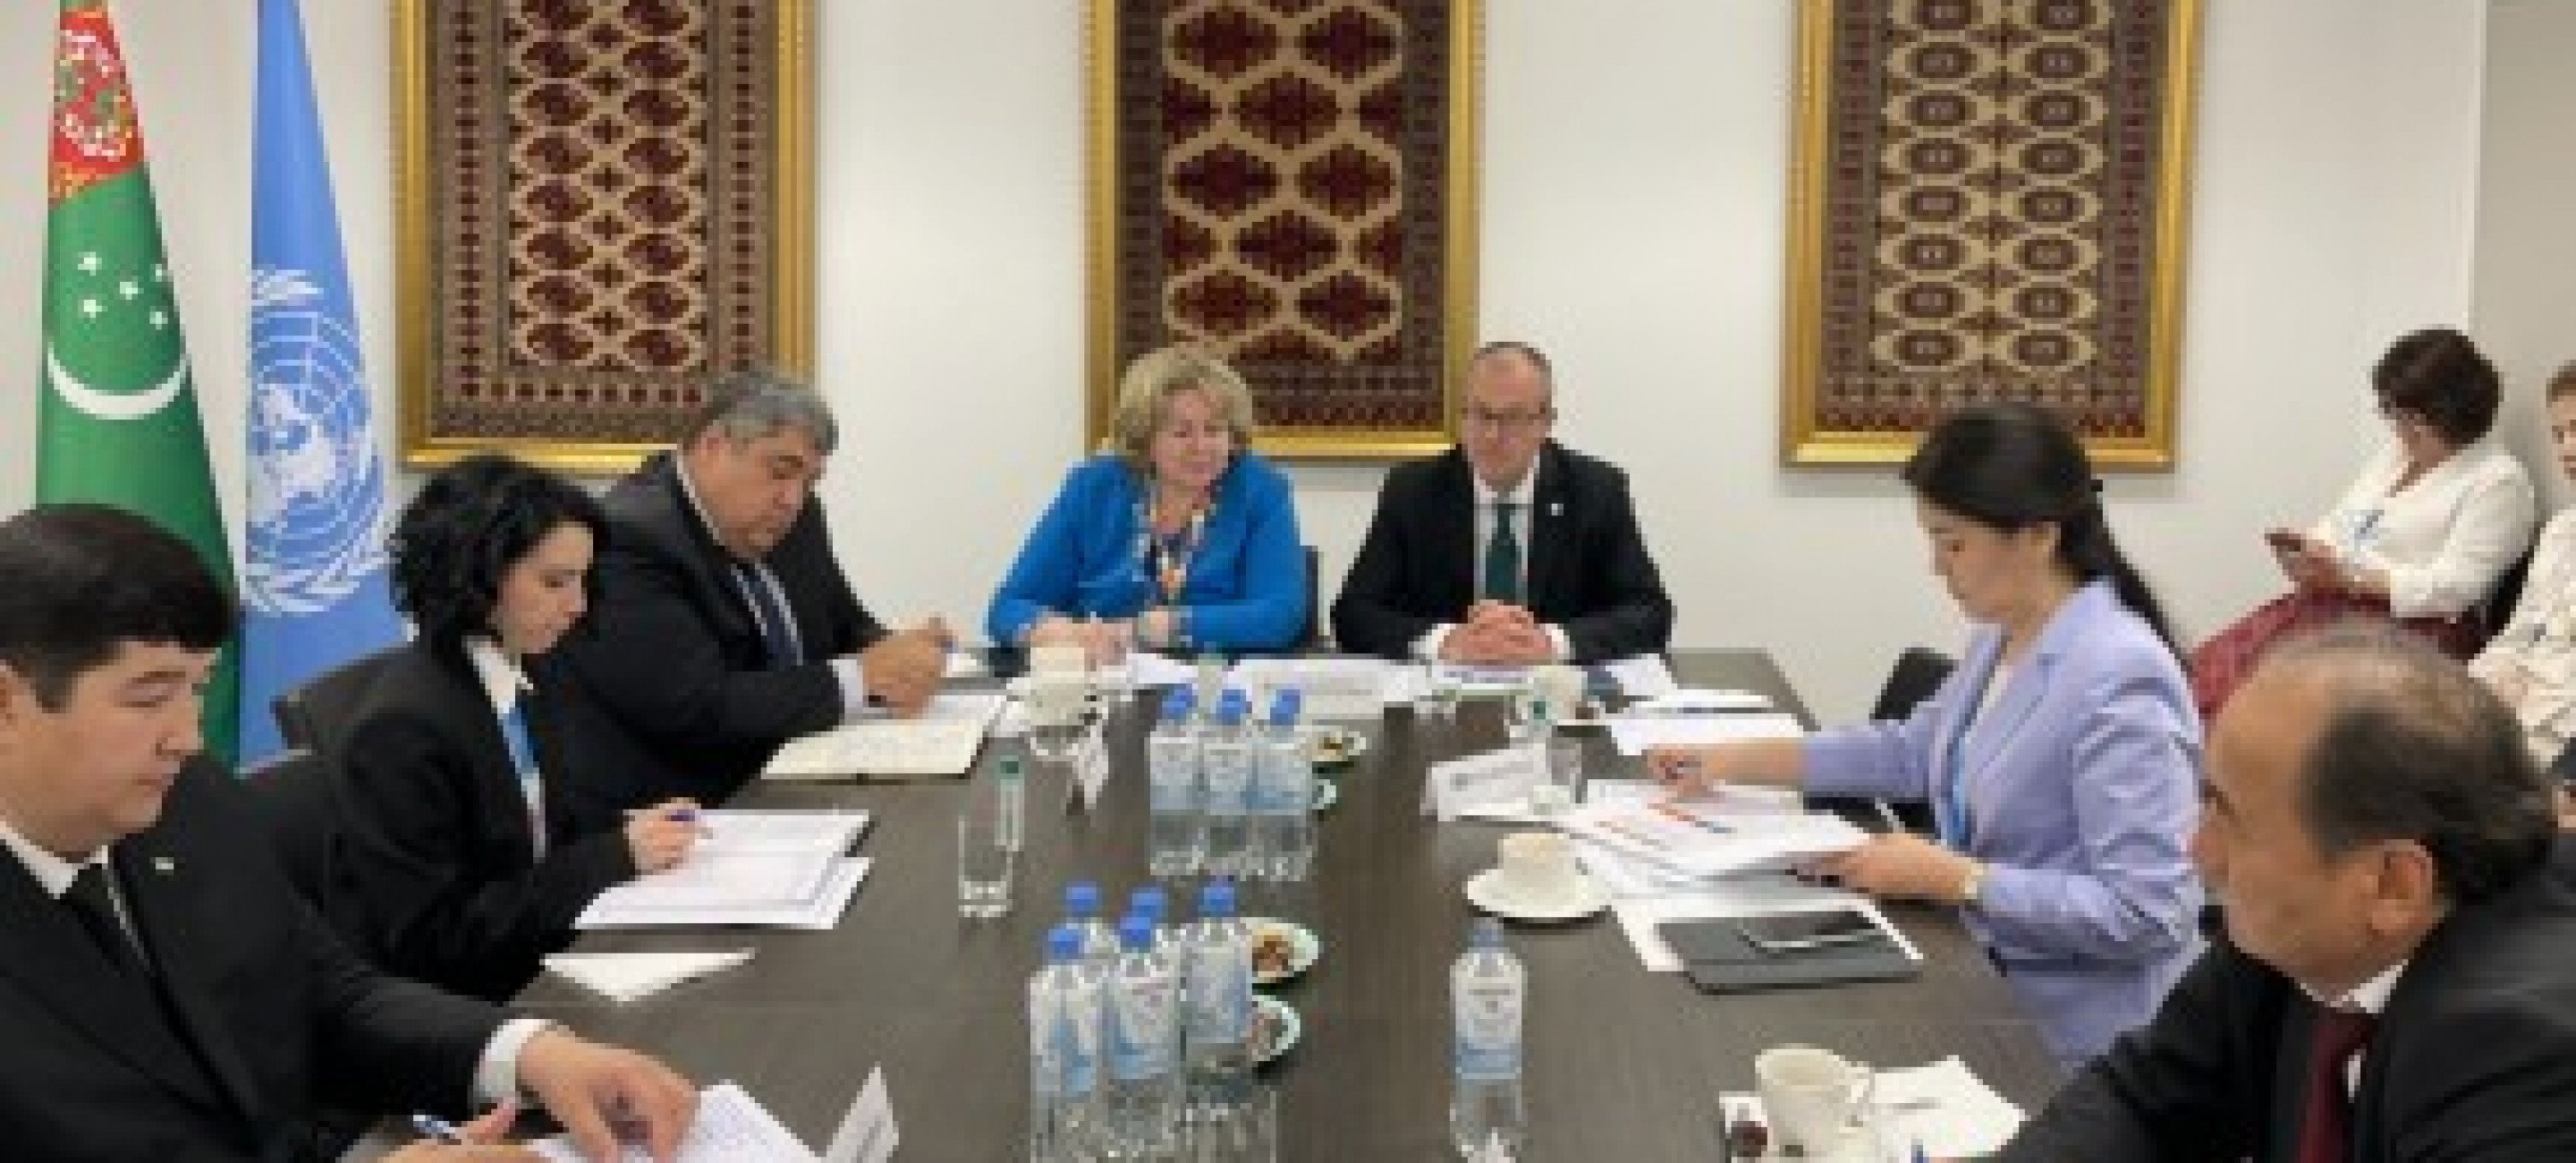 MEETING OF THE MINISTERS OF HEALTH OF THE CENTRAL ASIAN COUNTRIES, WITH THE PARTICIPATION WHO REGIONAL DIRECTOR FOR EUROPE